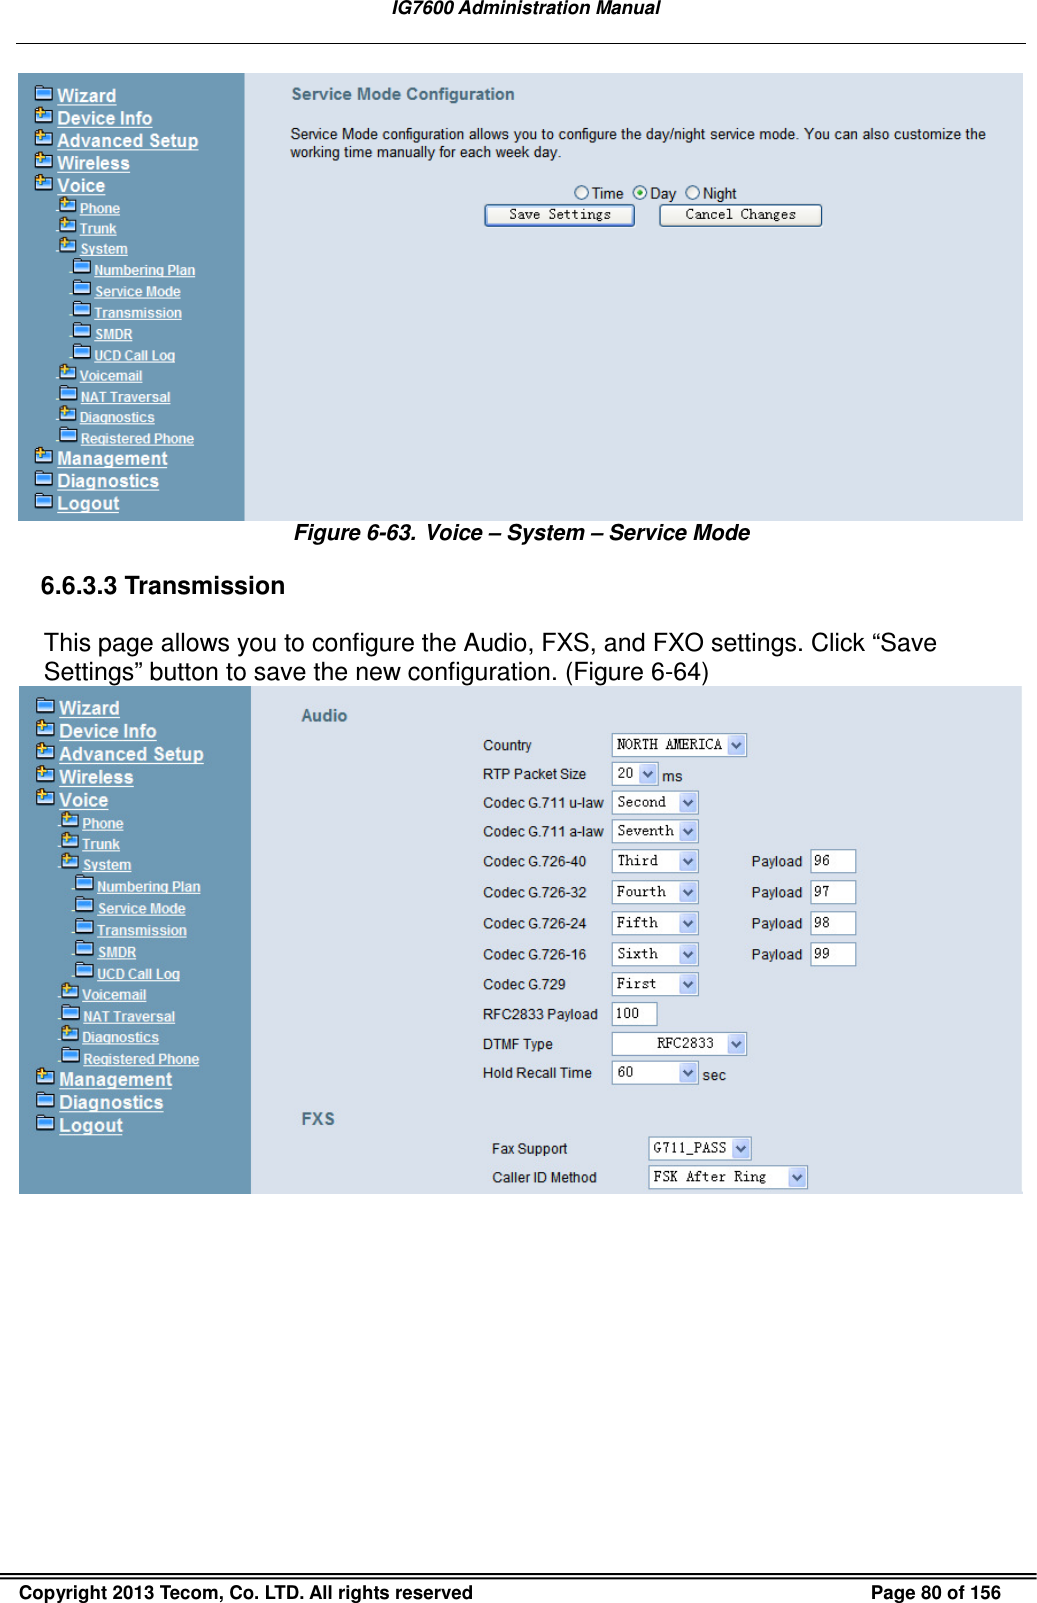   IG7600 Administration Manual  Copyright 2013 Tecom, Co. LTD. All rights reserved  Page 80 of 156  Figure 6-63. Voice – System – Service Mode 6.6.3.3 Transmission This page allows you to configure the Audio, FXS, and FXO settings. Click “Save Settings” button to save the new configuration. (Figure 6-64)  